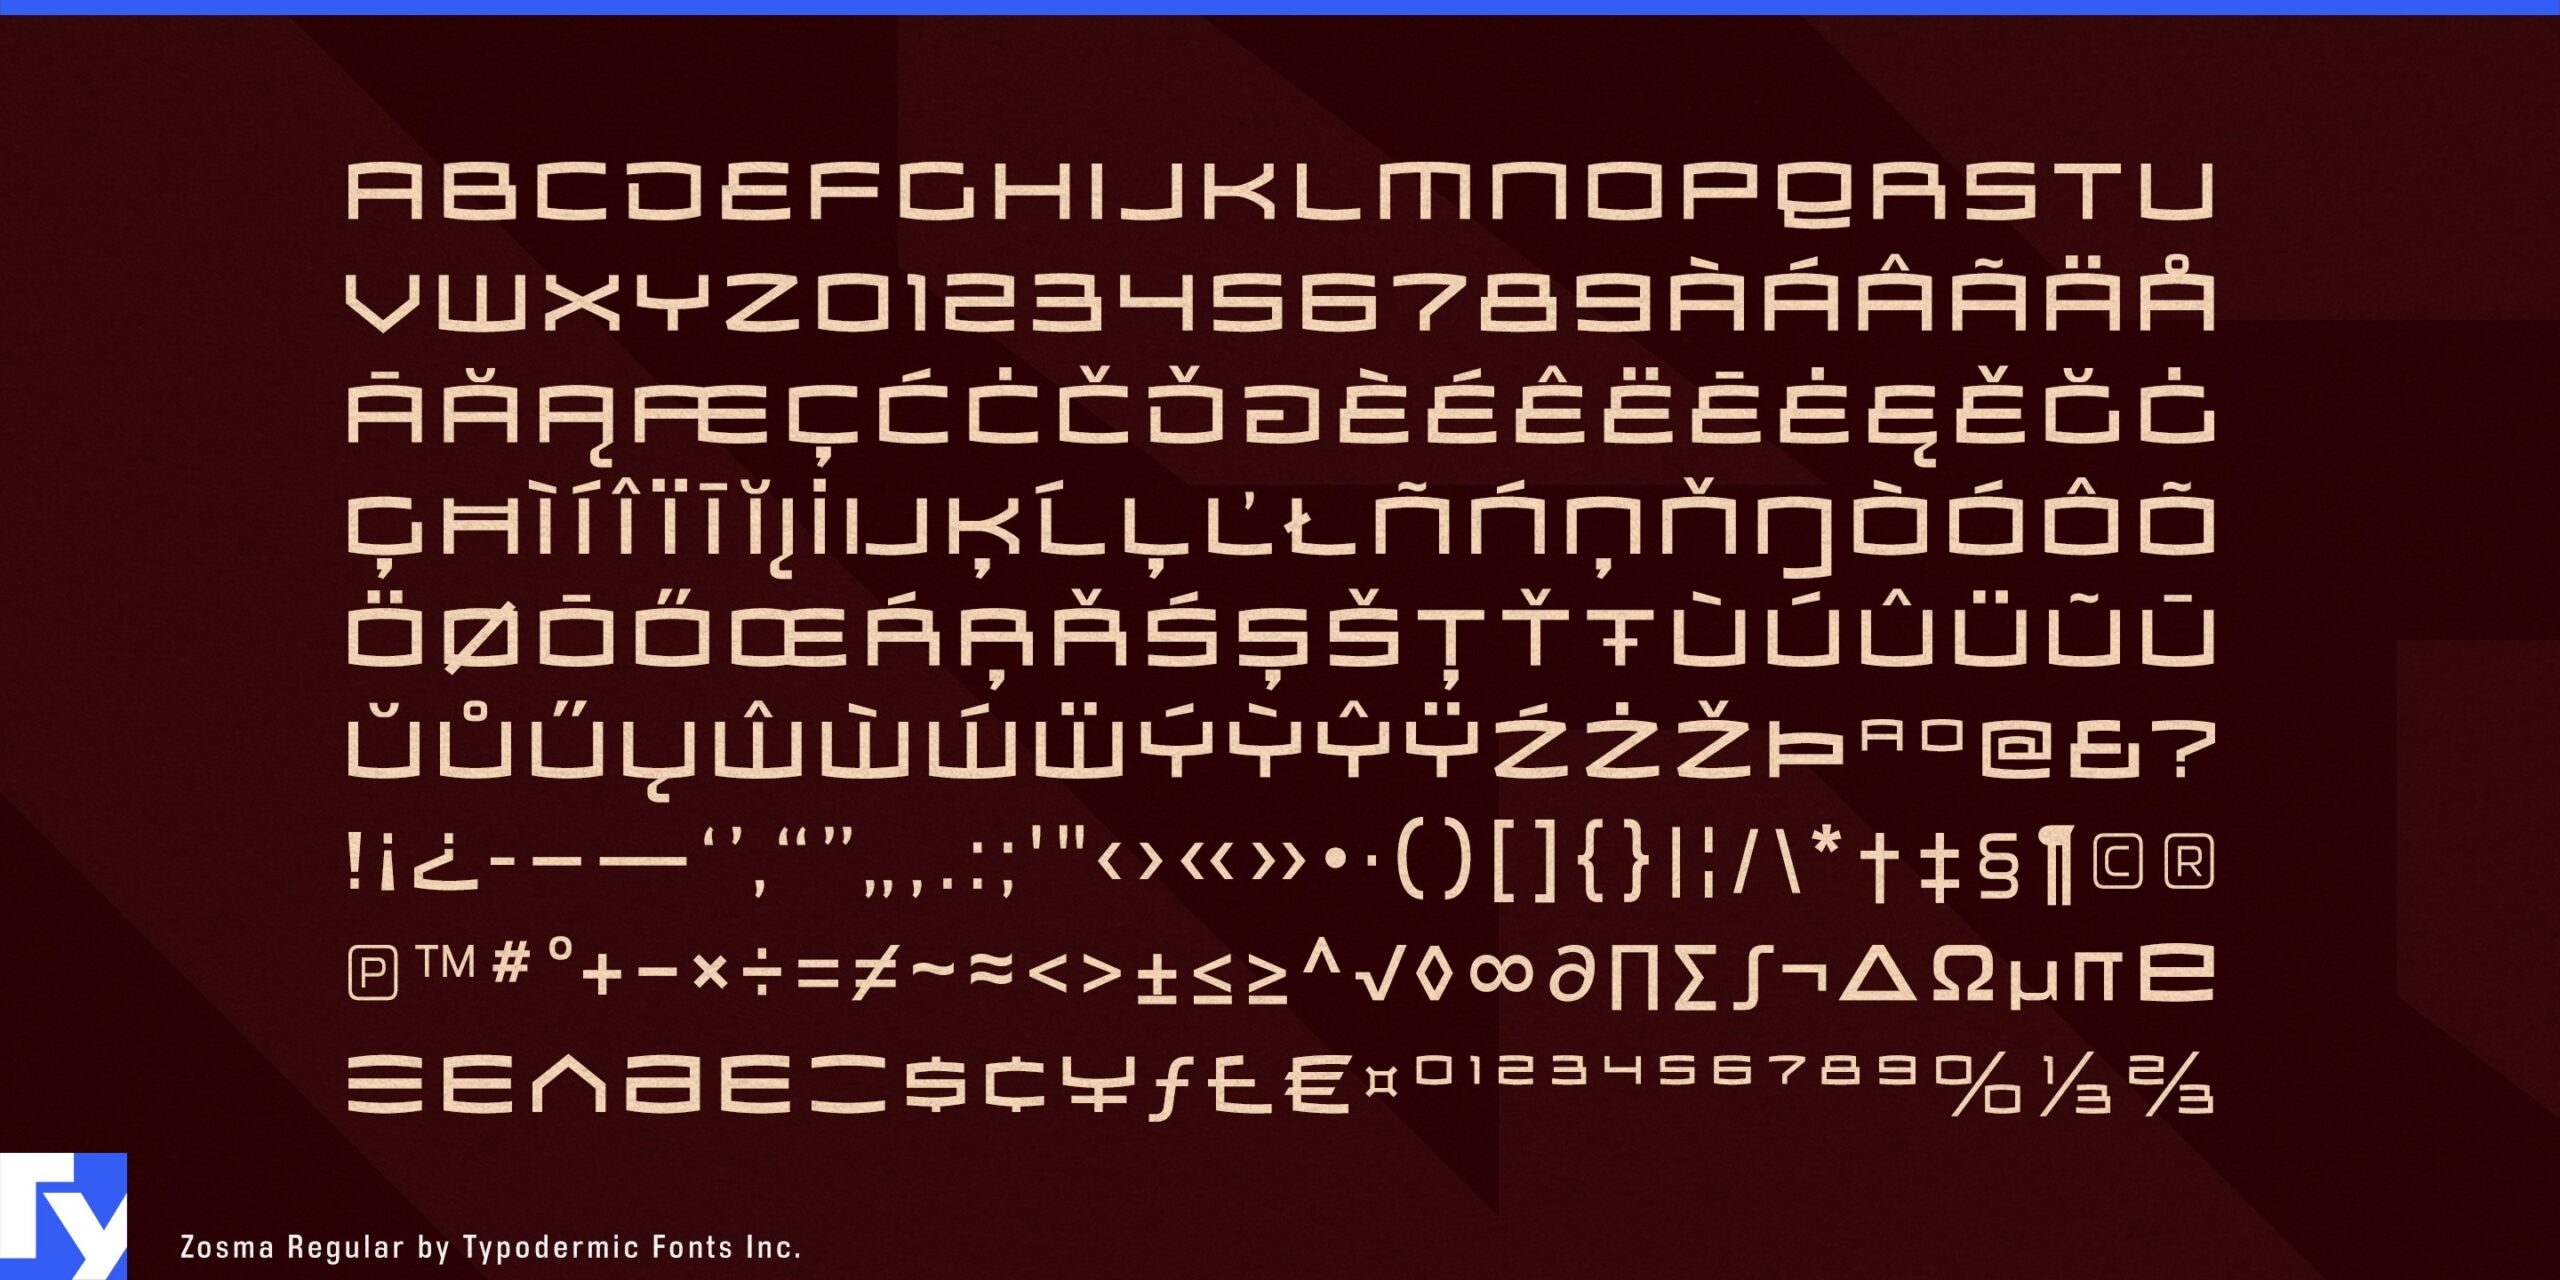 Precision and Power: Zosma Typeface Takes Center Stage